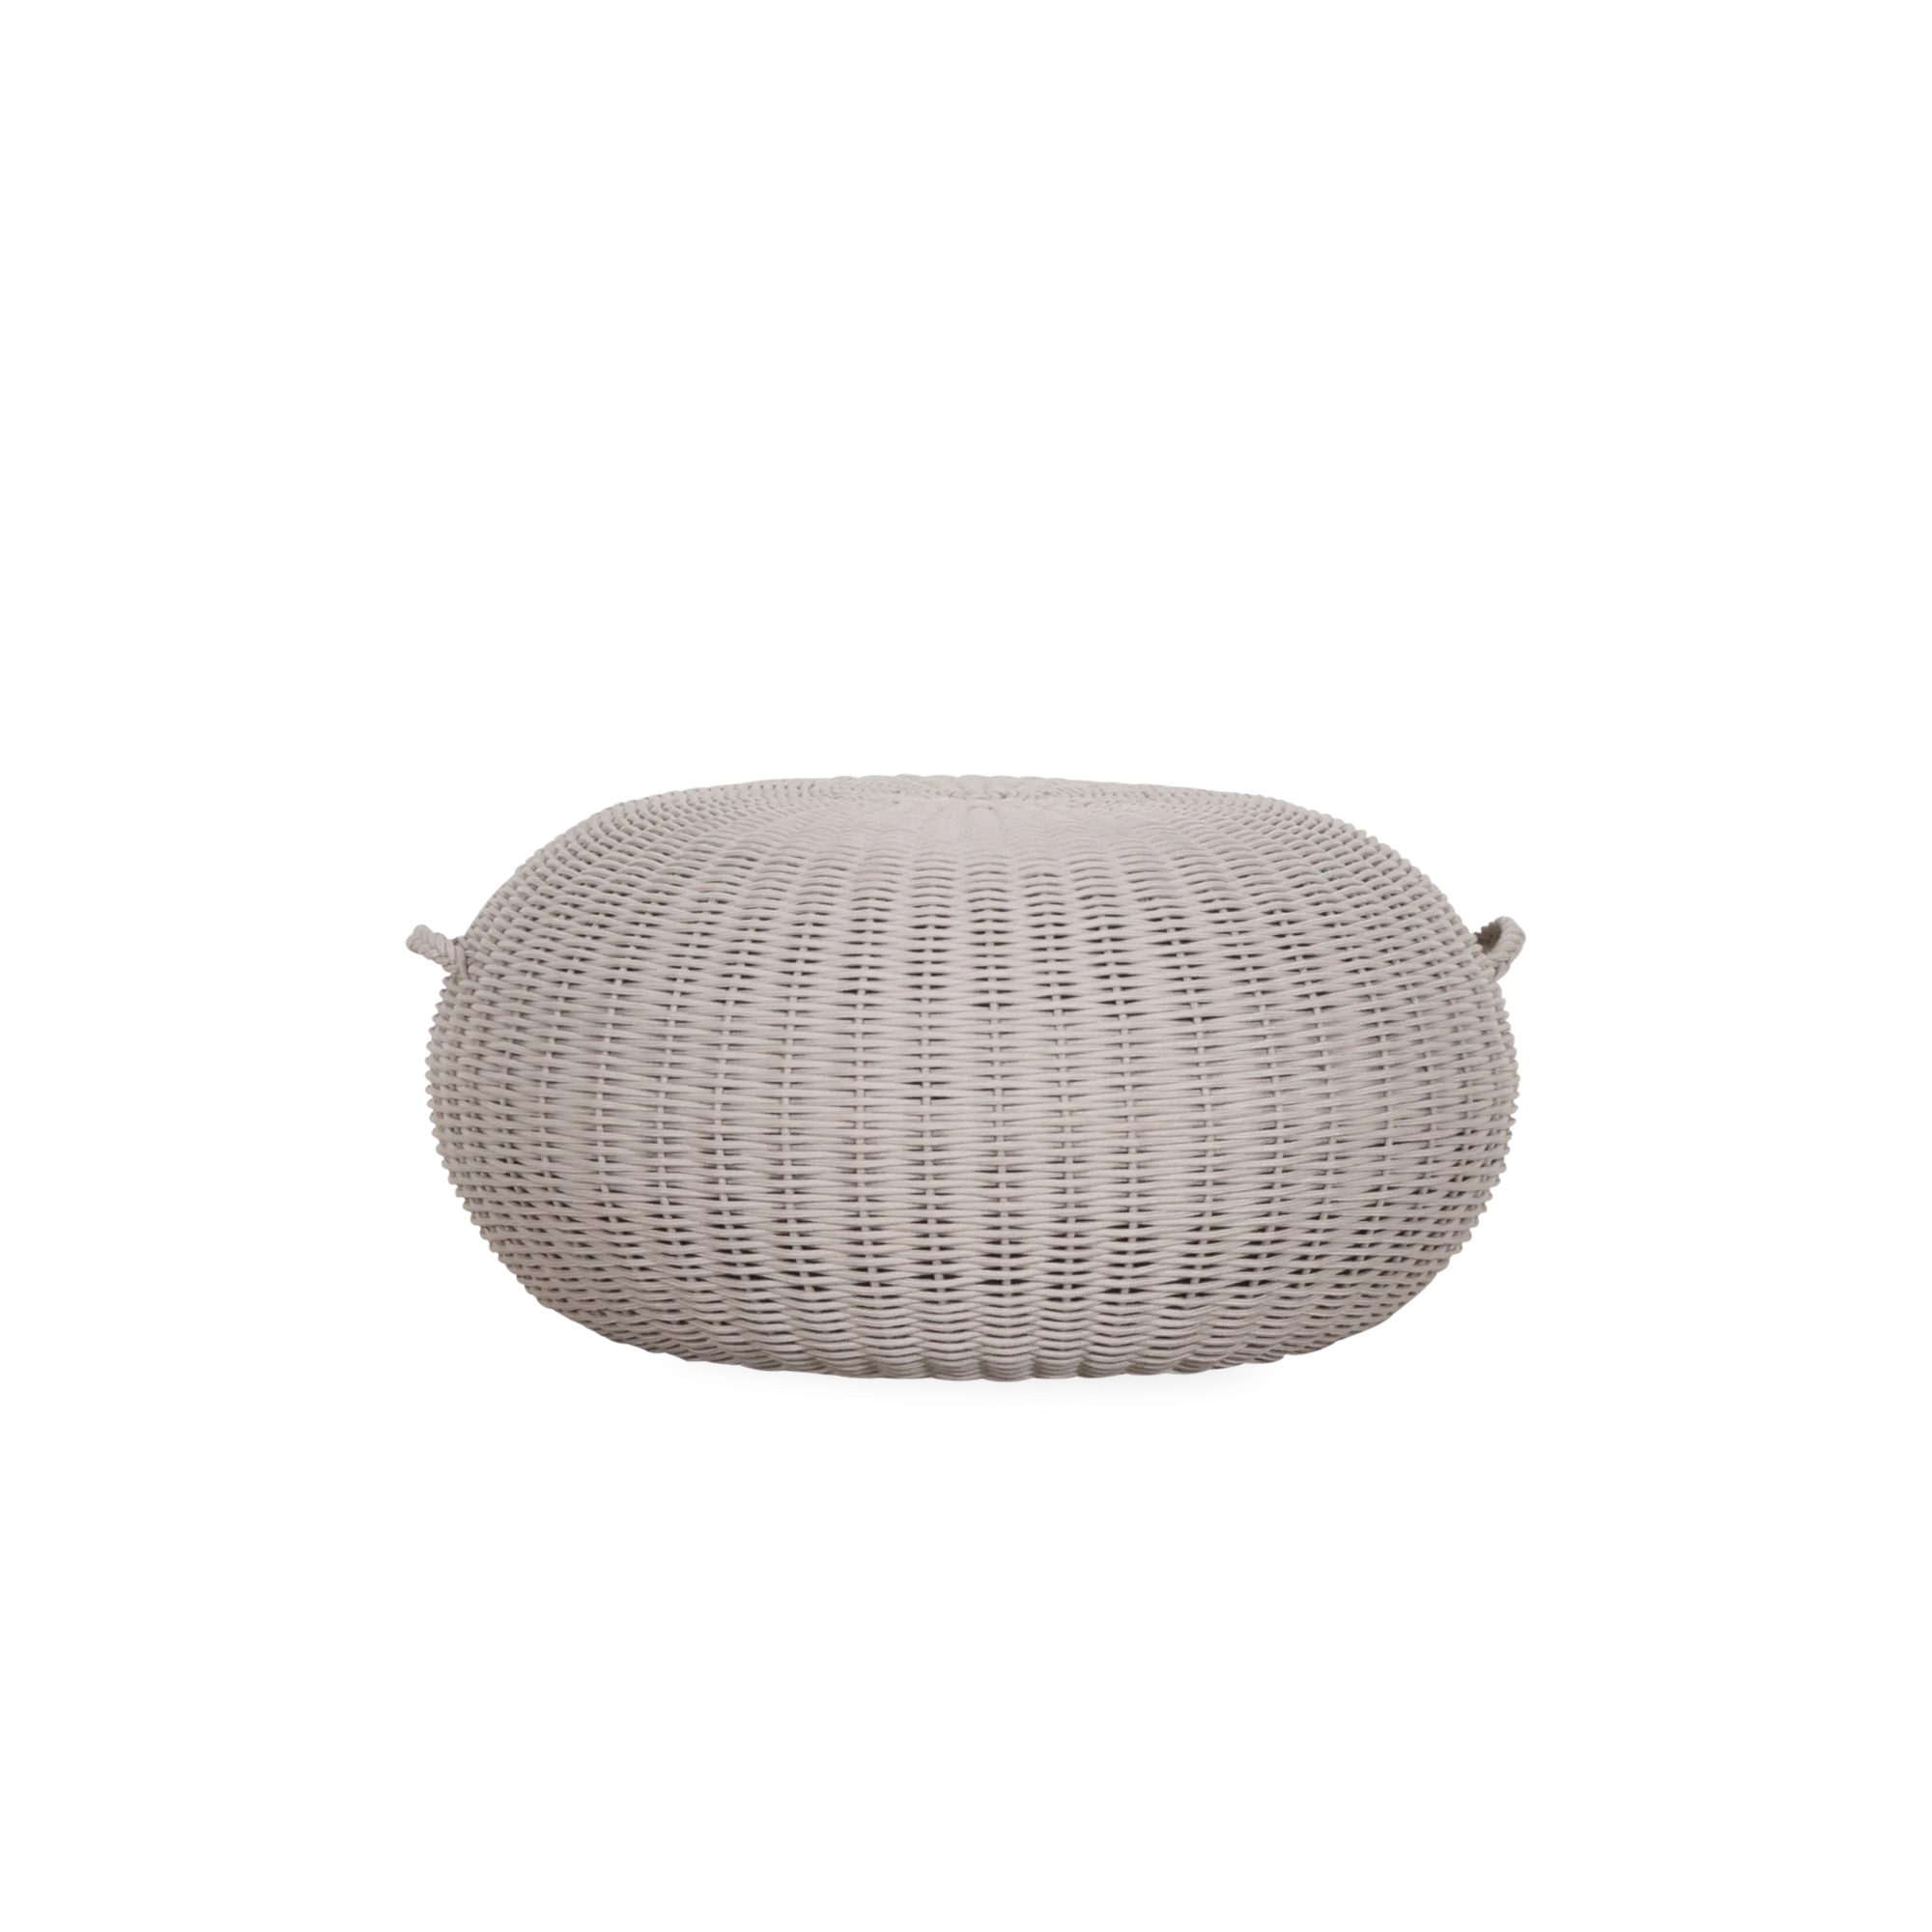 Designed in collaboration with Ann Marie Vering, the Juno Pouf is a fun and functional piece that can be used with any collection as extra seating or ottoman.